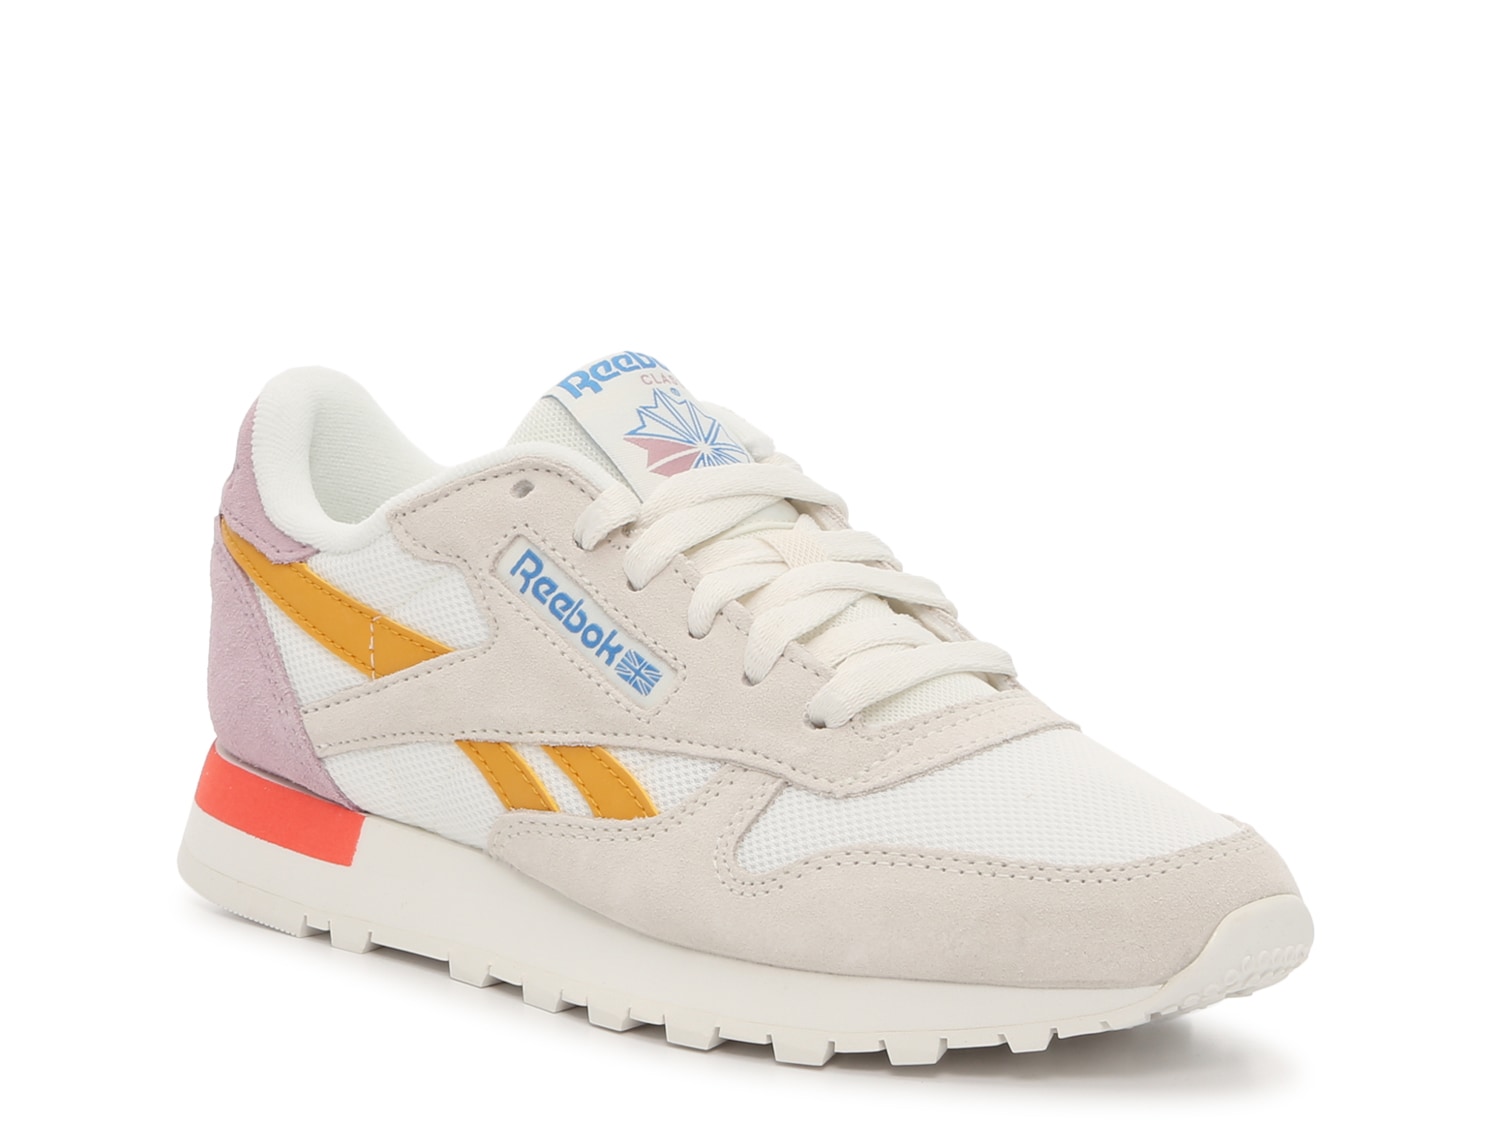 Reebok Classic CLASSIC LEATHER White / Blue / Yellow - Free delivery